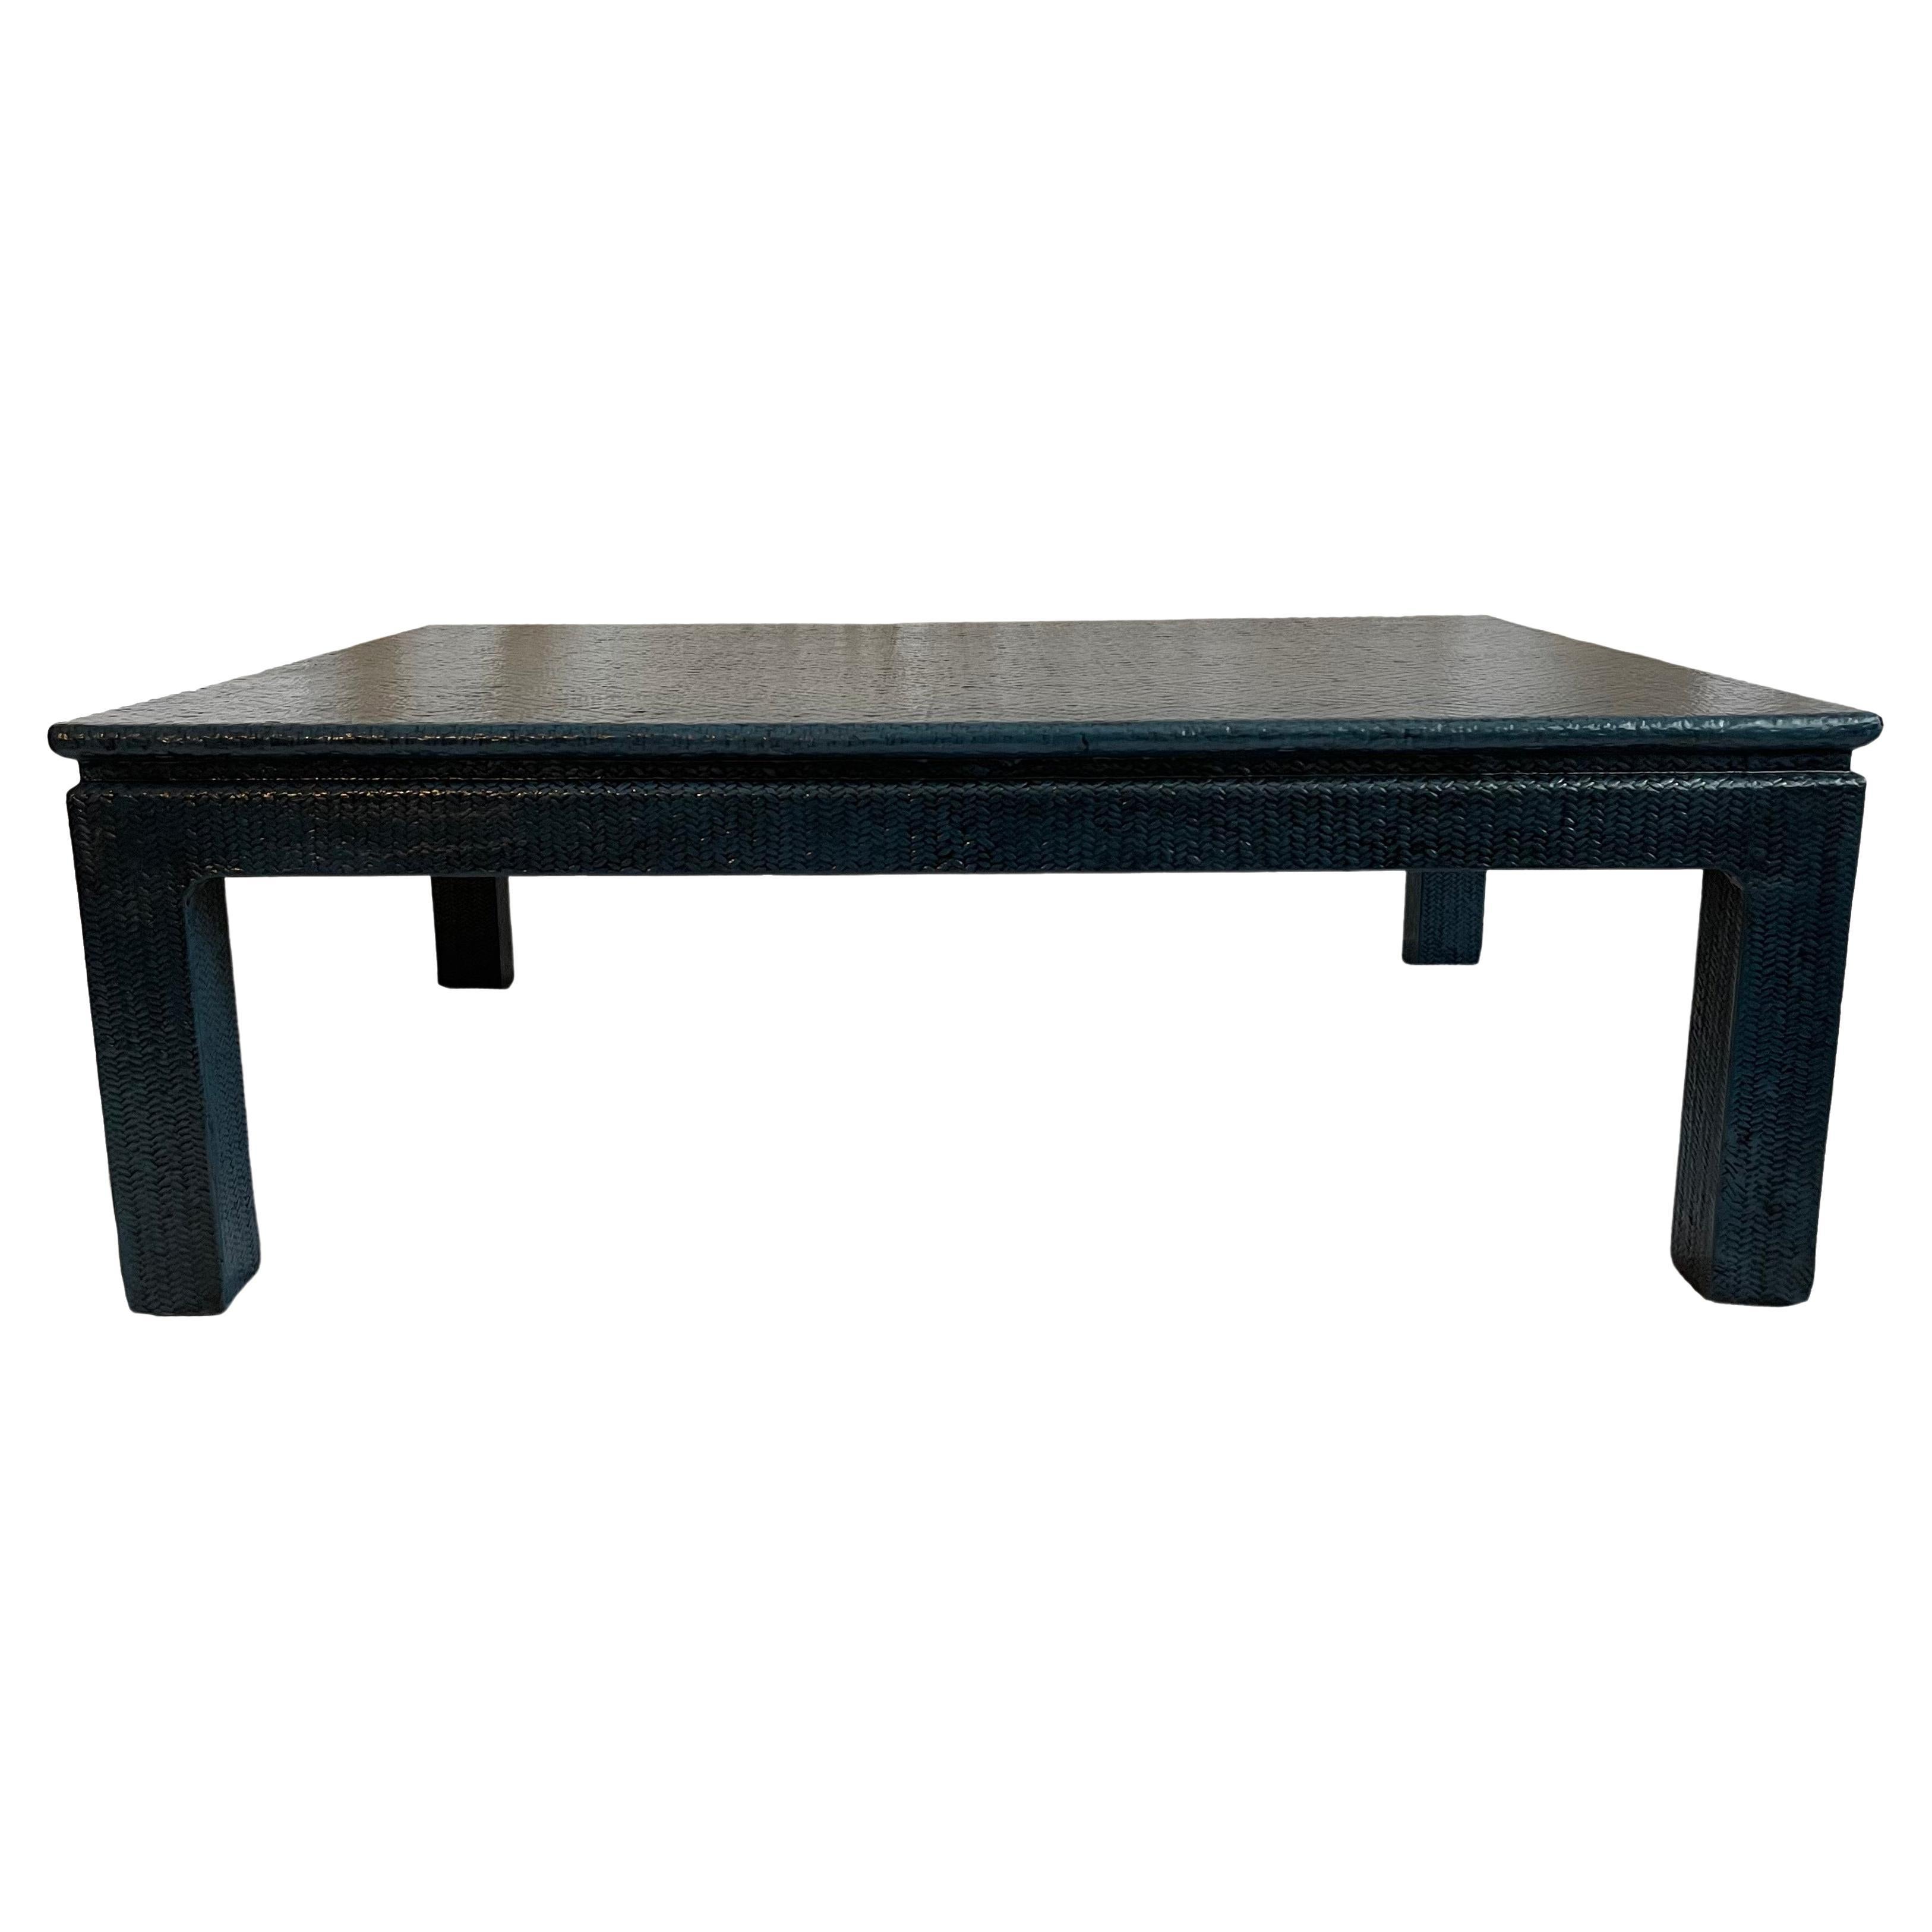 1970s Grasscloth Dark Blue Painted Large Cocktail Table